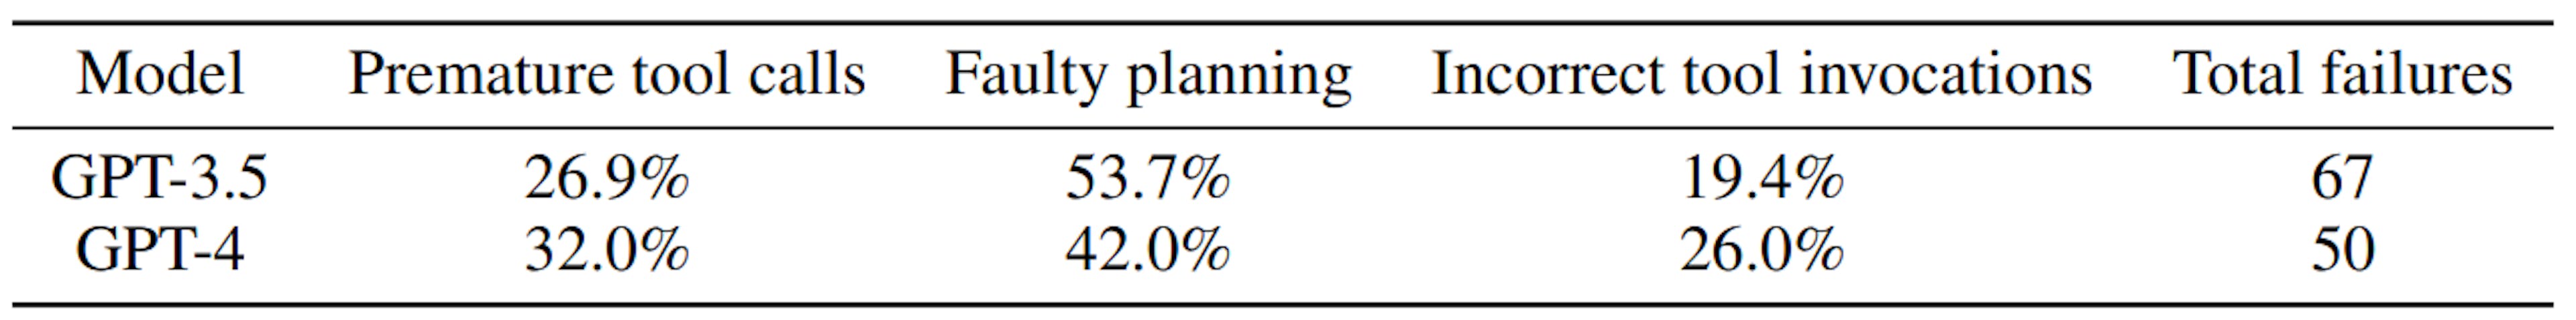 Table 2: Percent of failing error types out of all failing turns for GPT-3.5 and GPT-4.